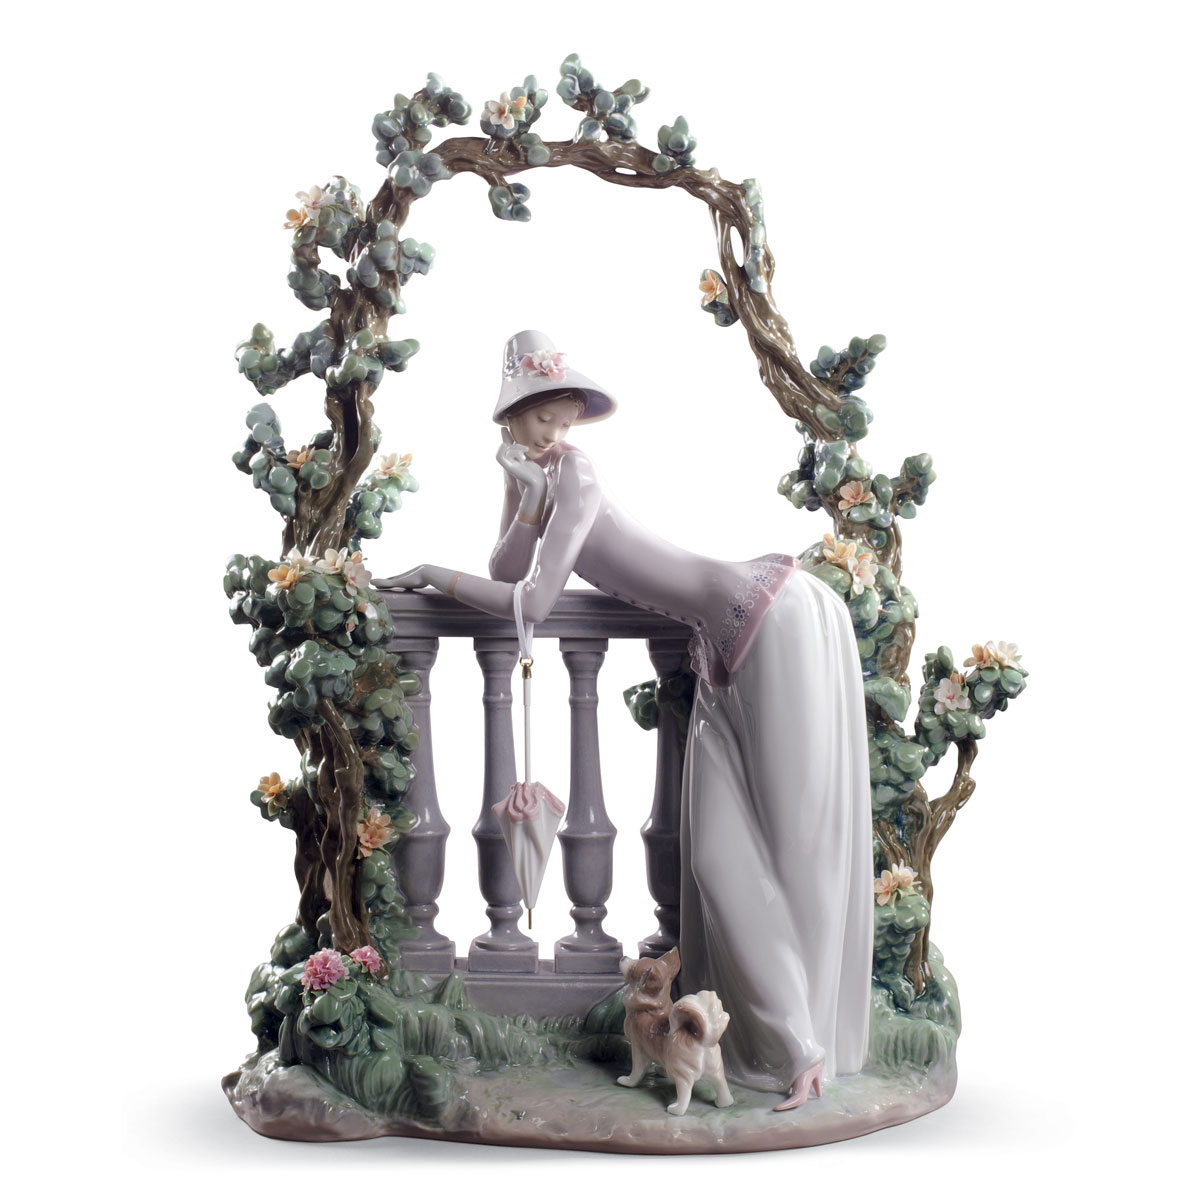 Lladro Classic Sculpture, In The Balustrade Woman Sculpture